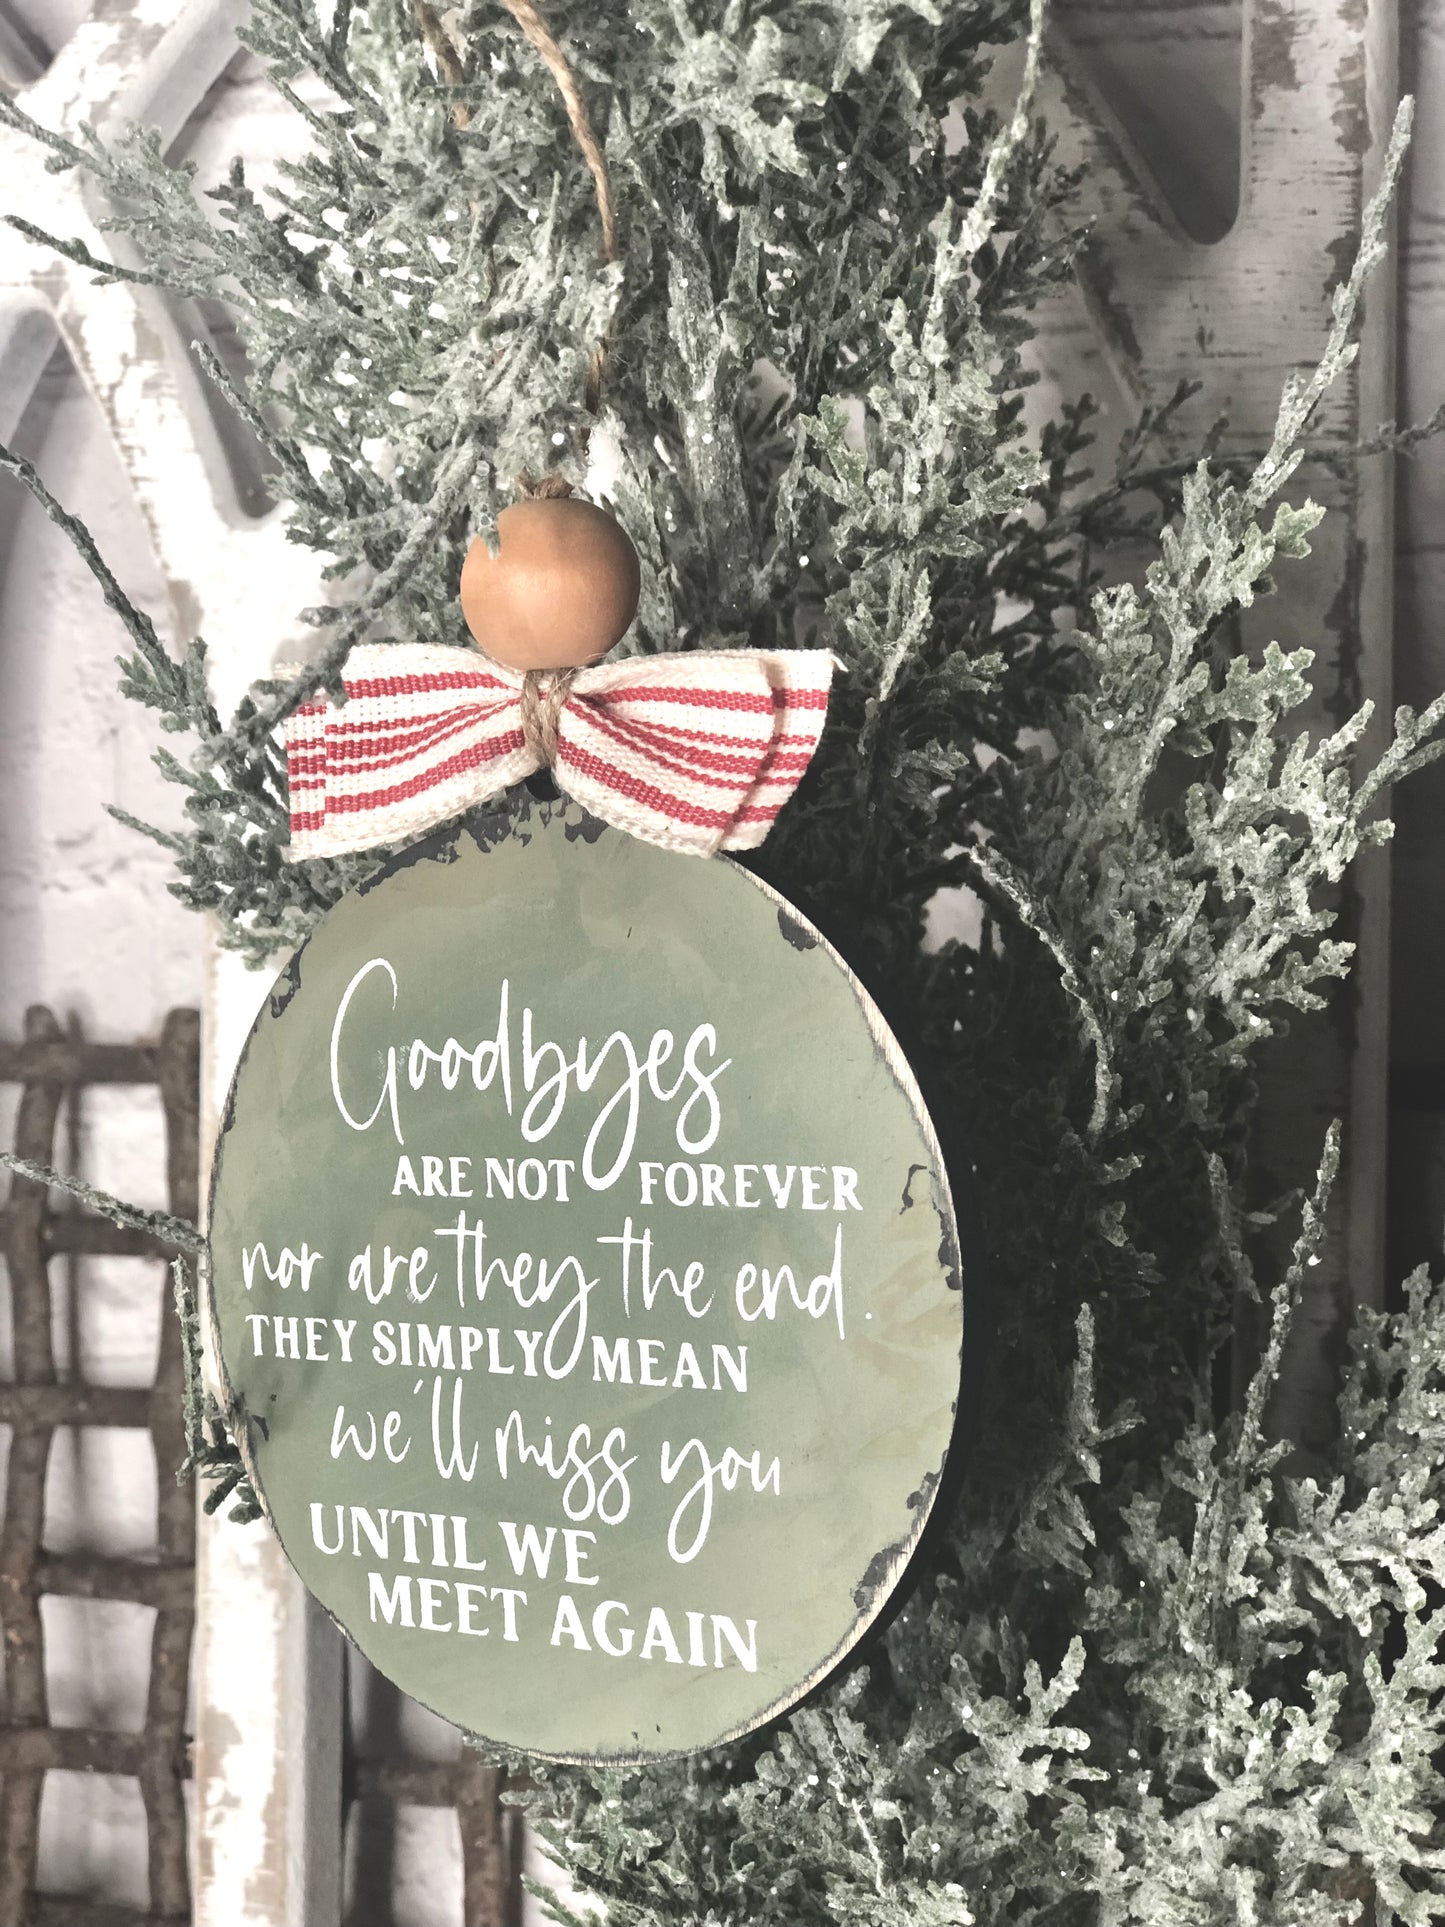 CHRISTMAS ORNAMENT - GOODBYES ARE NOT FOREVER